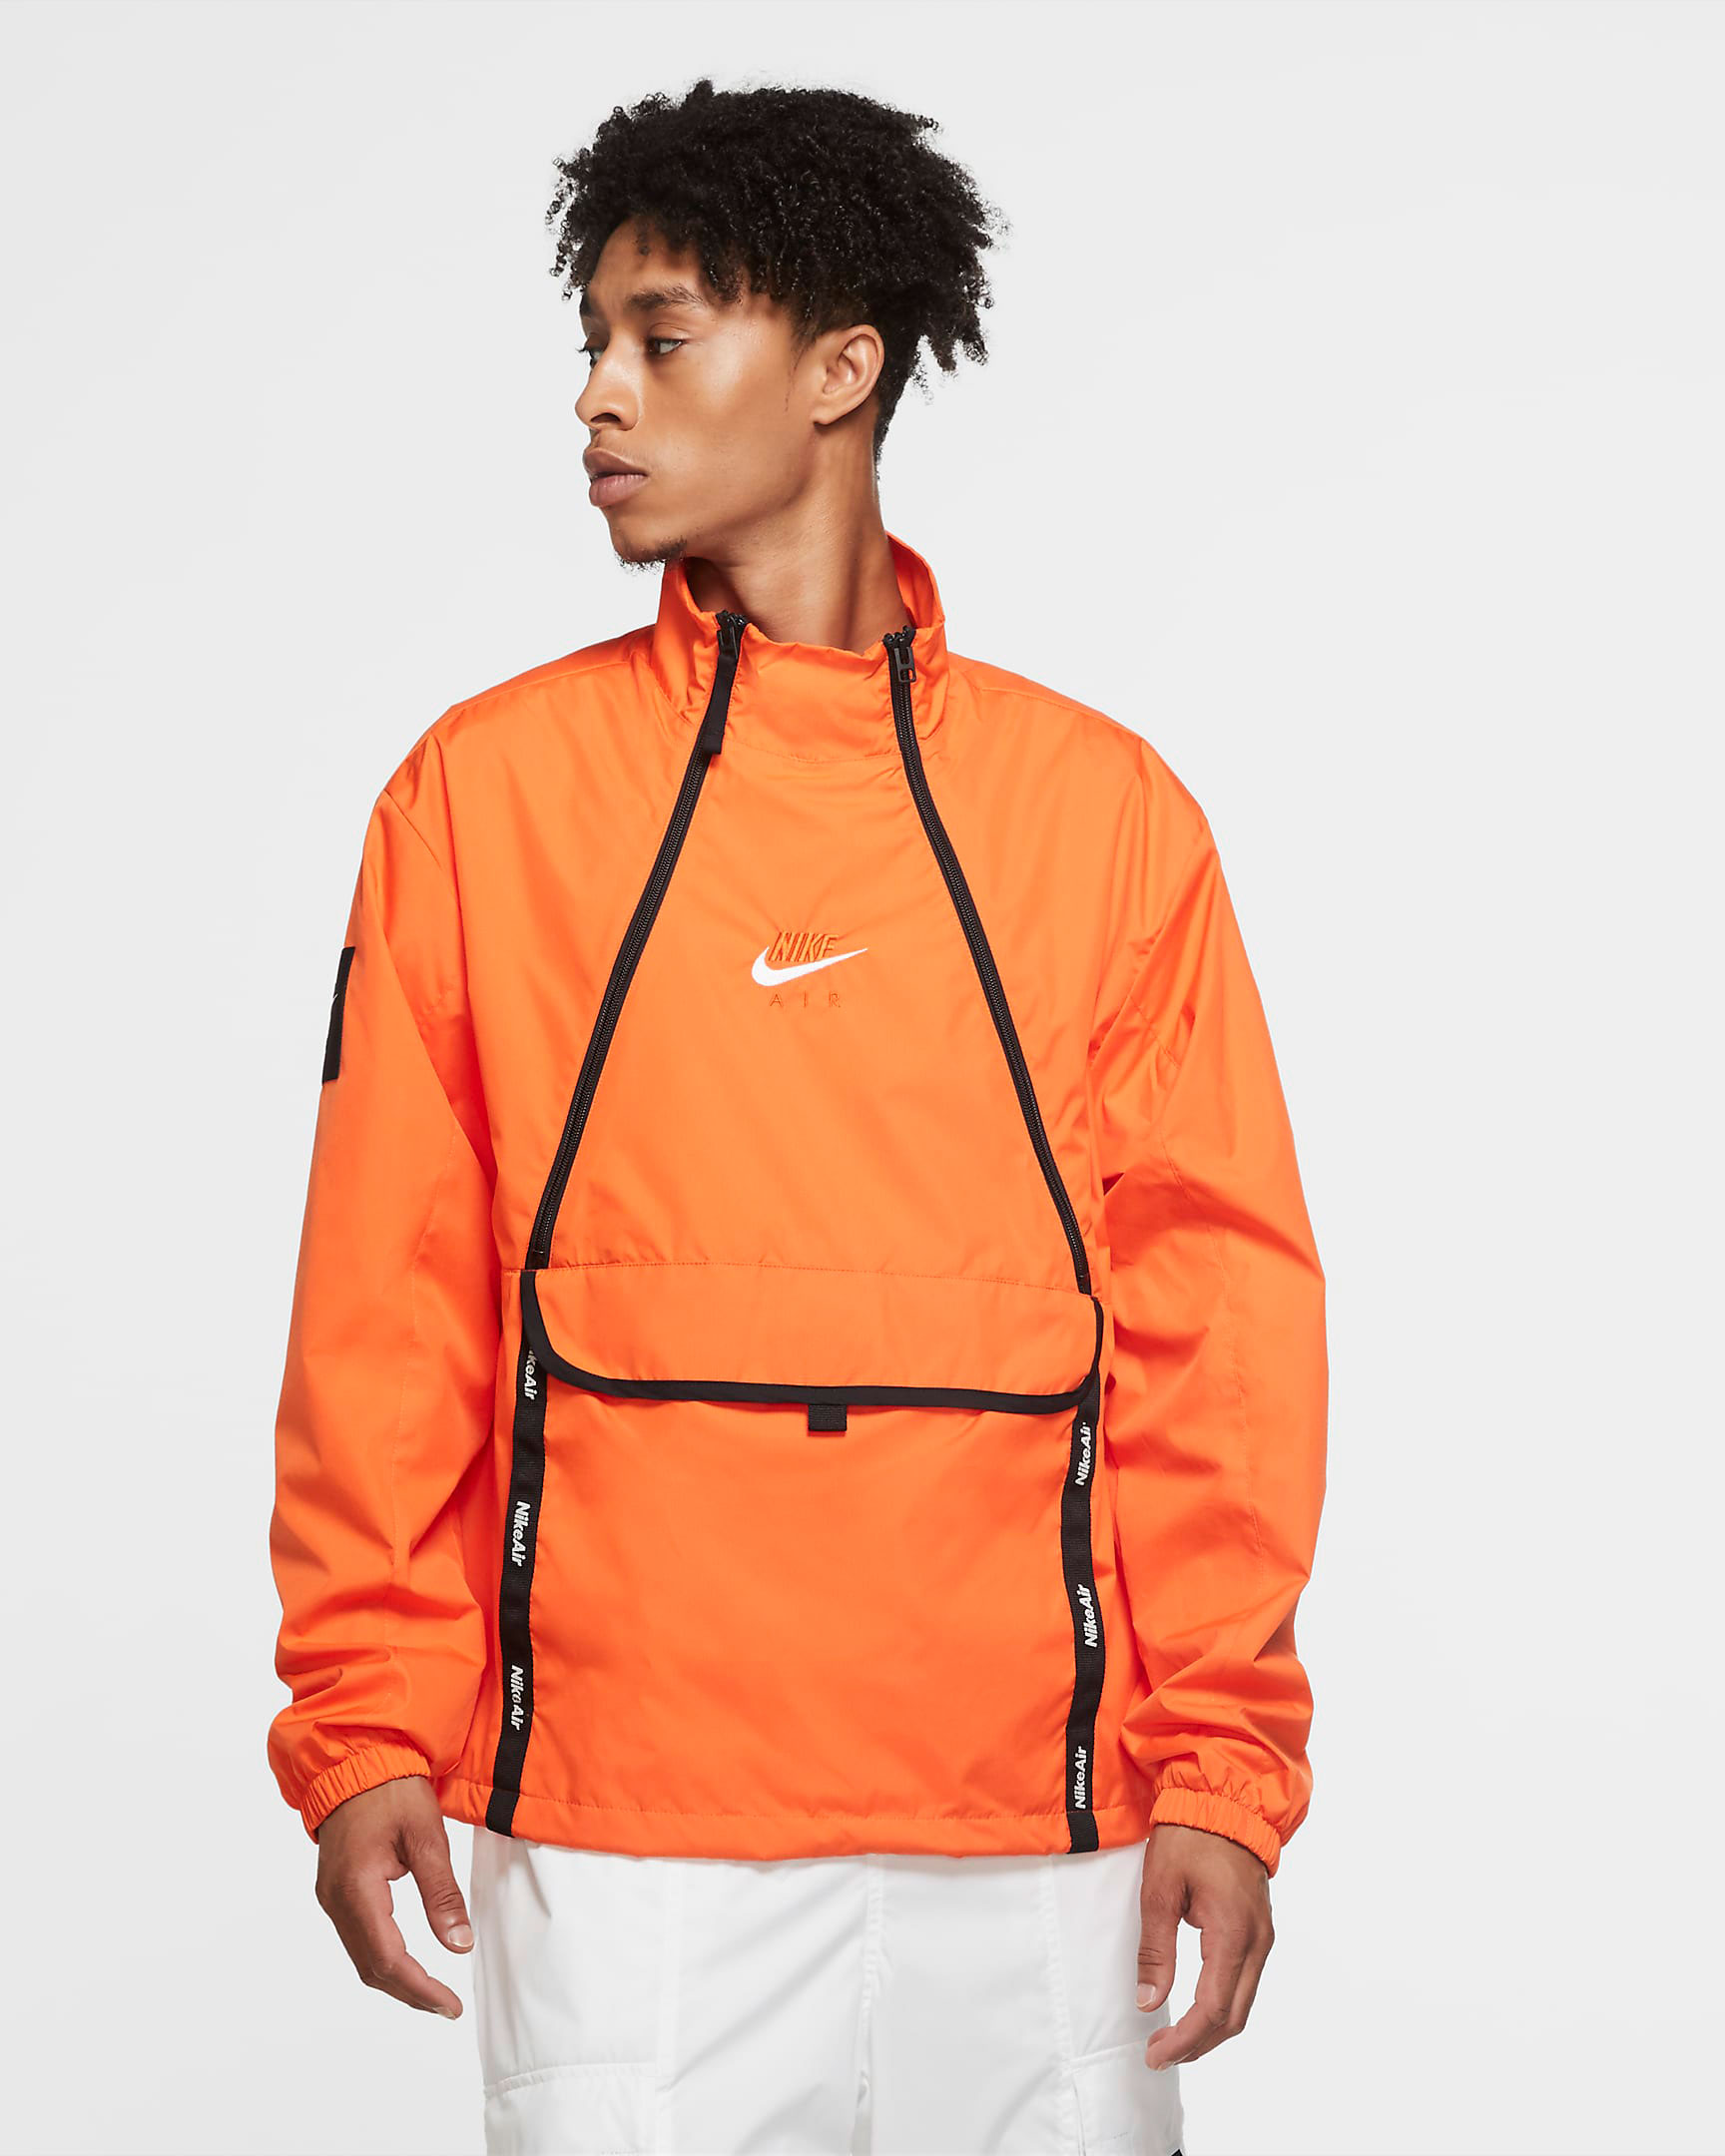 Nike Air Reflective Jackets for Fall 2020 | SneakerFits.com